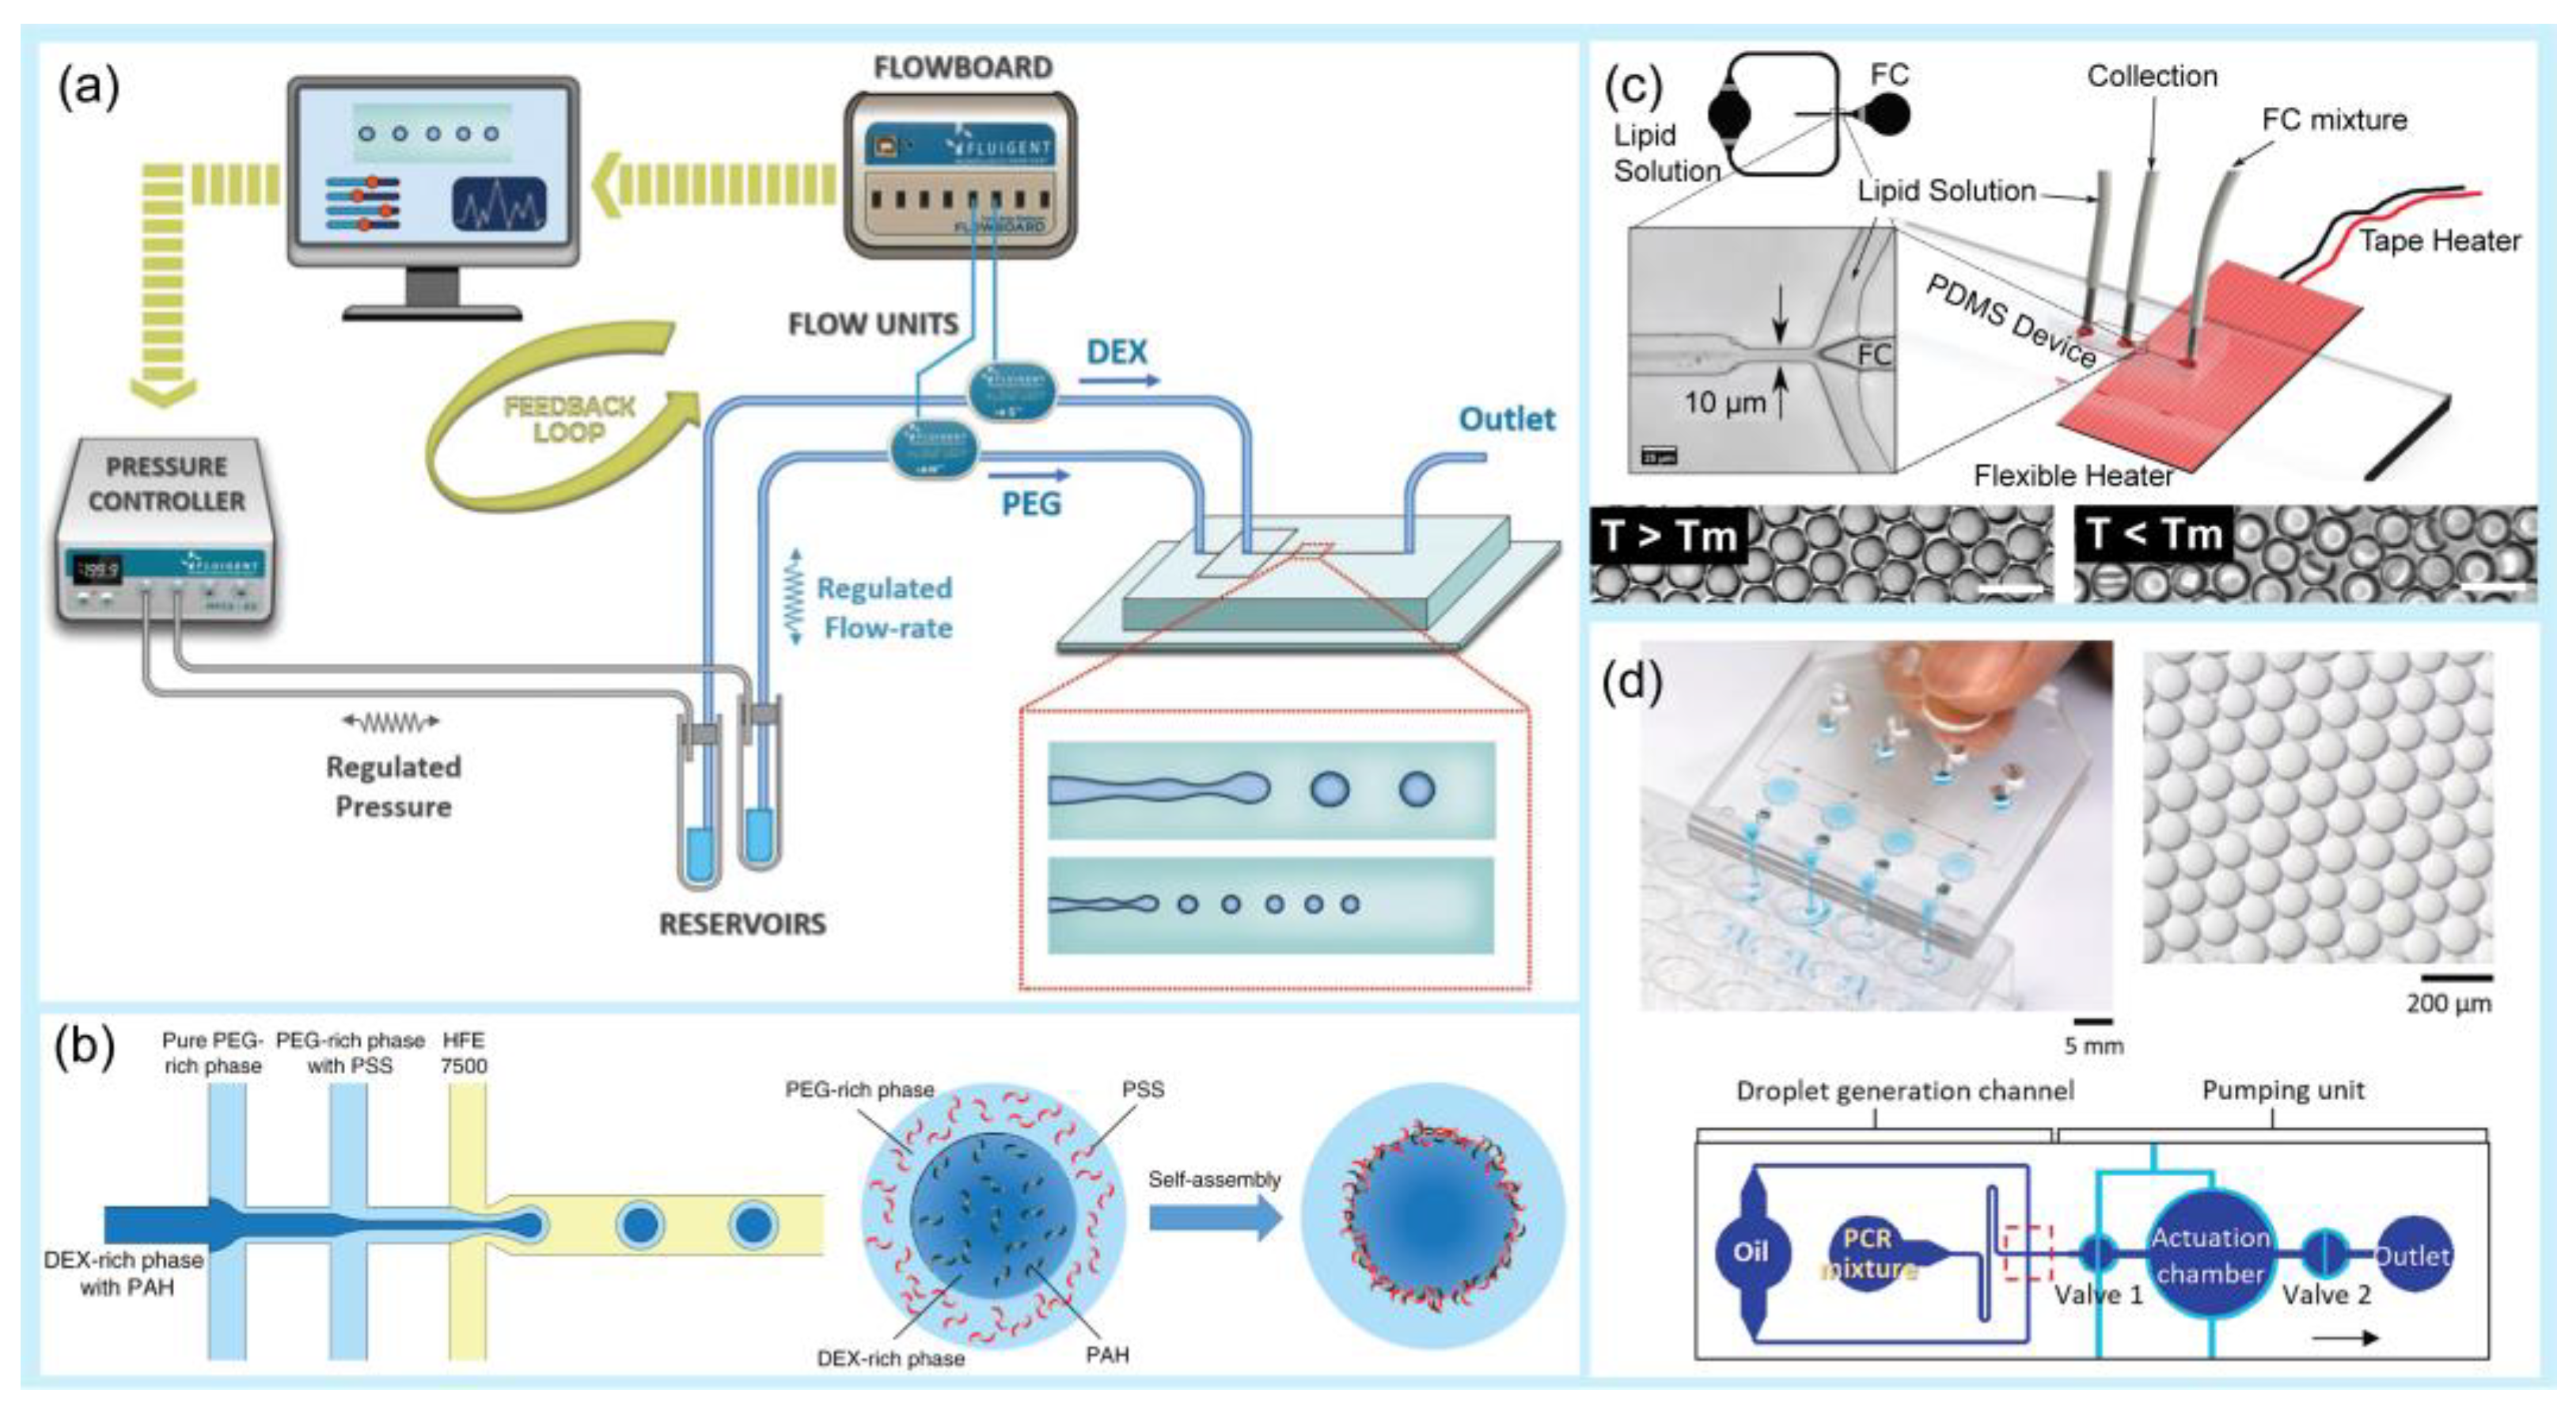 Flexible Materials for High-Resolution 3D Printing of Microfluidic Devices  with Integrated Droplet Size Regulation